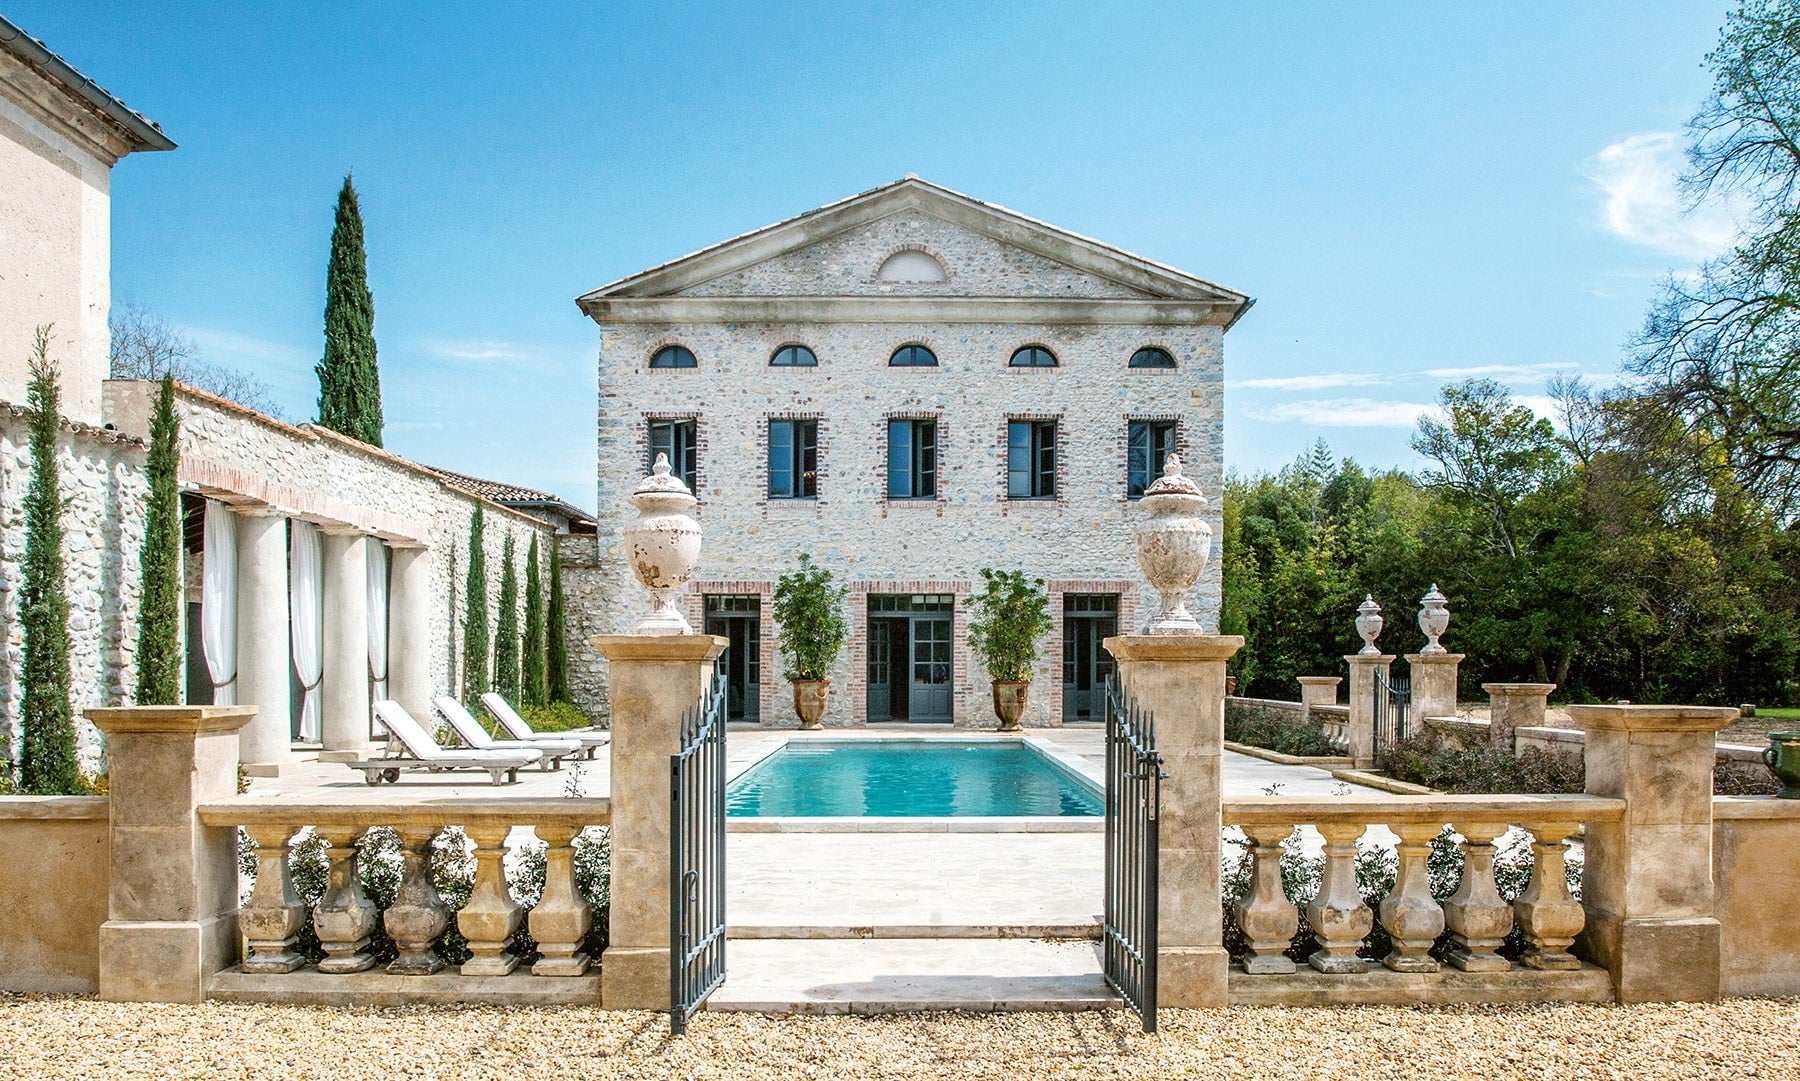 The guesthouse and pool at Château de Cardet, photographed by Tim Street-Porter.